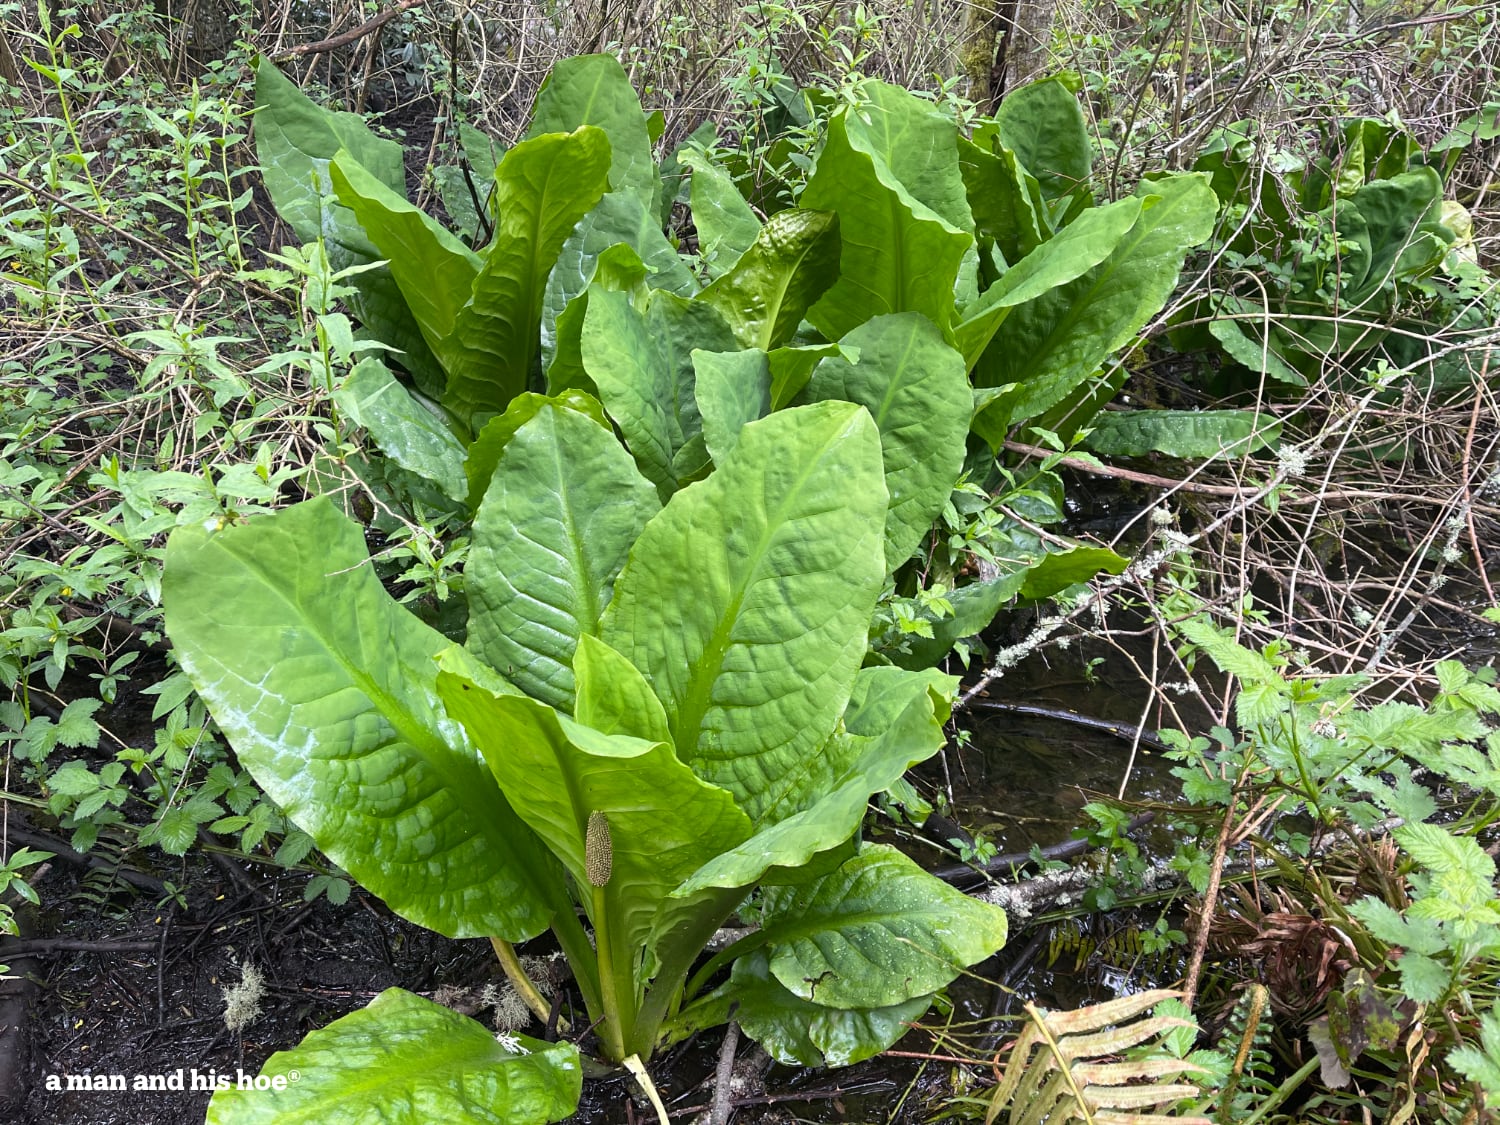 Skunk cabbage growing vigorously in the woods.